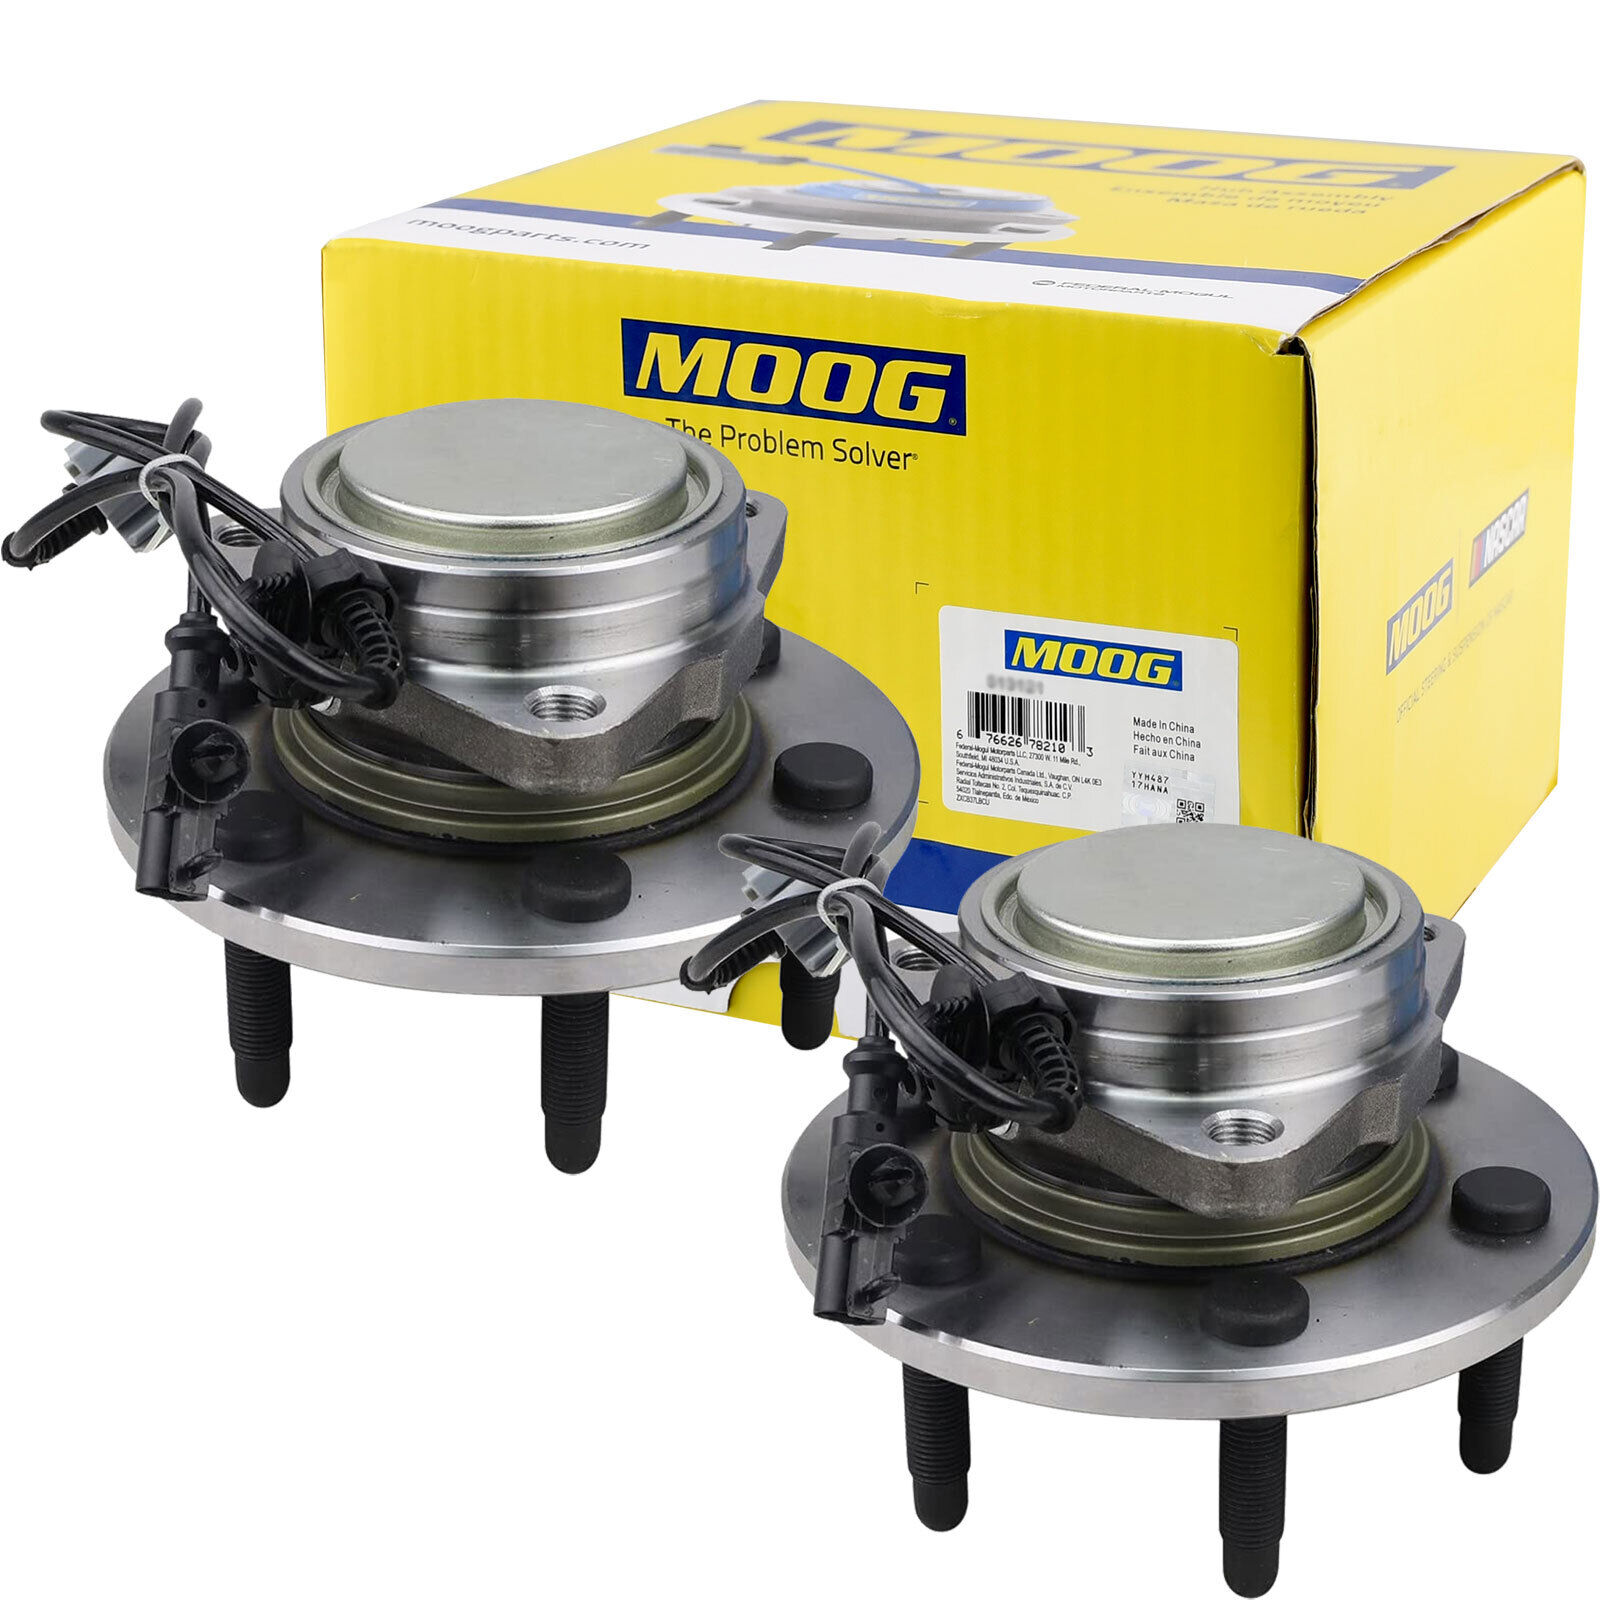 2WD MOOG Front Wheel Bearings and Hubs for Chevy Silverado Suburban 1500 Tahoe